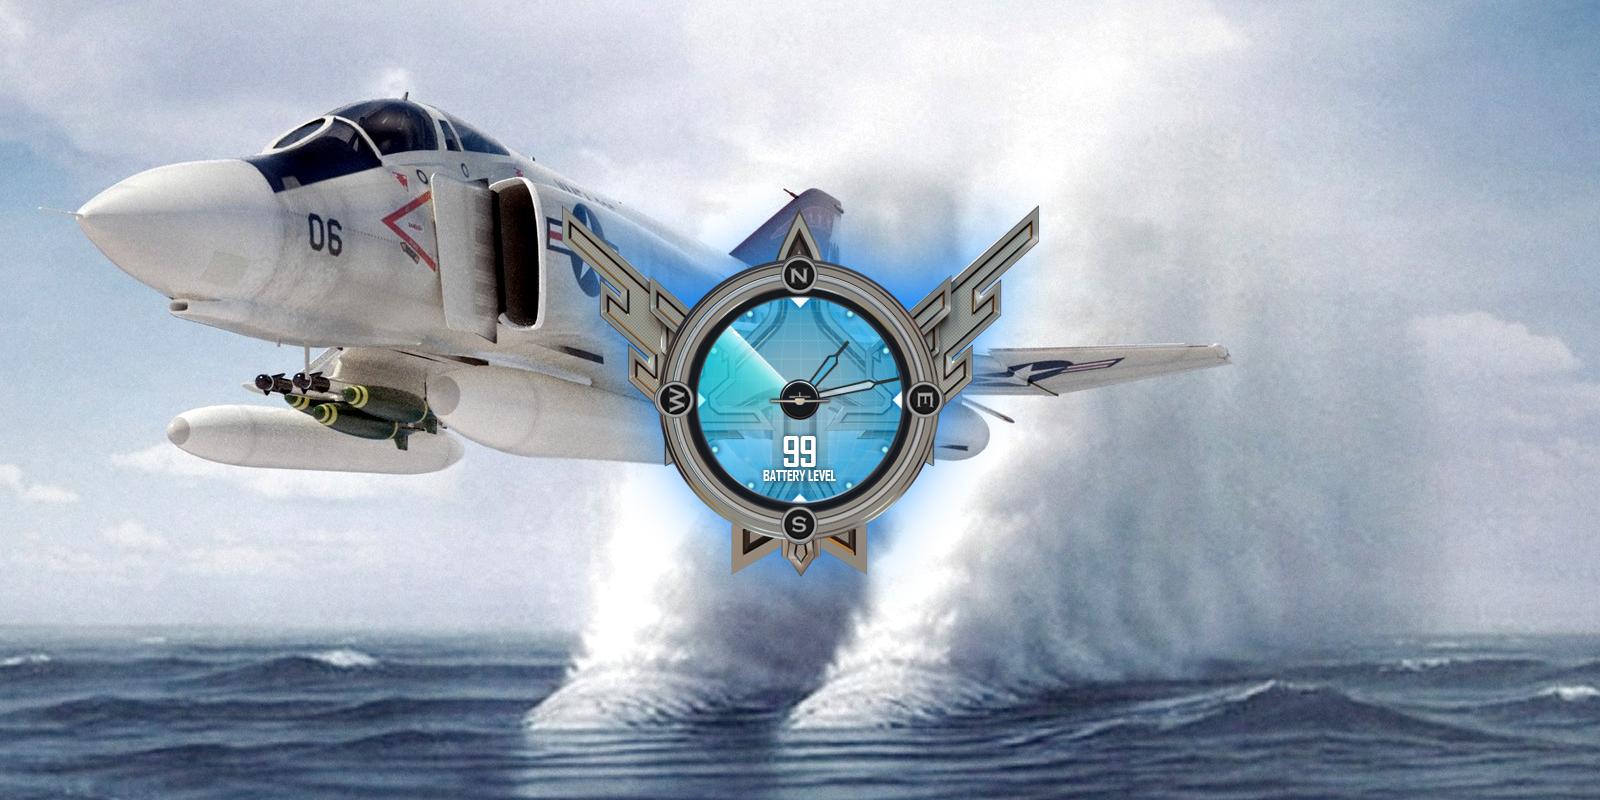 F4 Phantom Us Jet Fighters Lwp Android Apps On Google Play